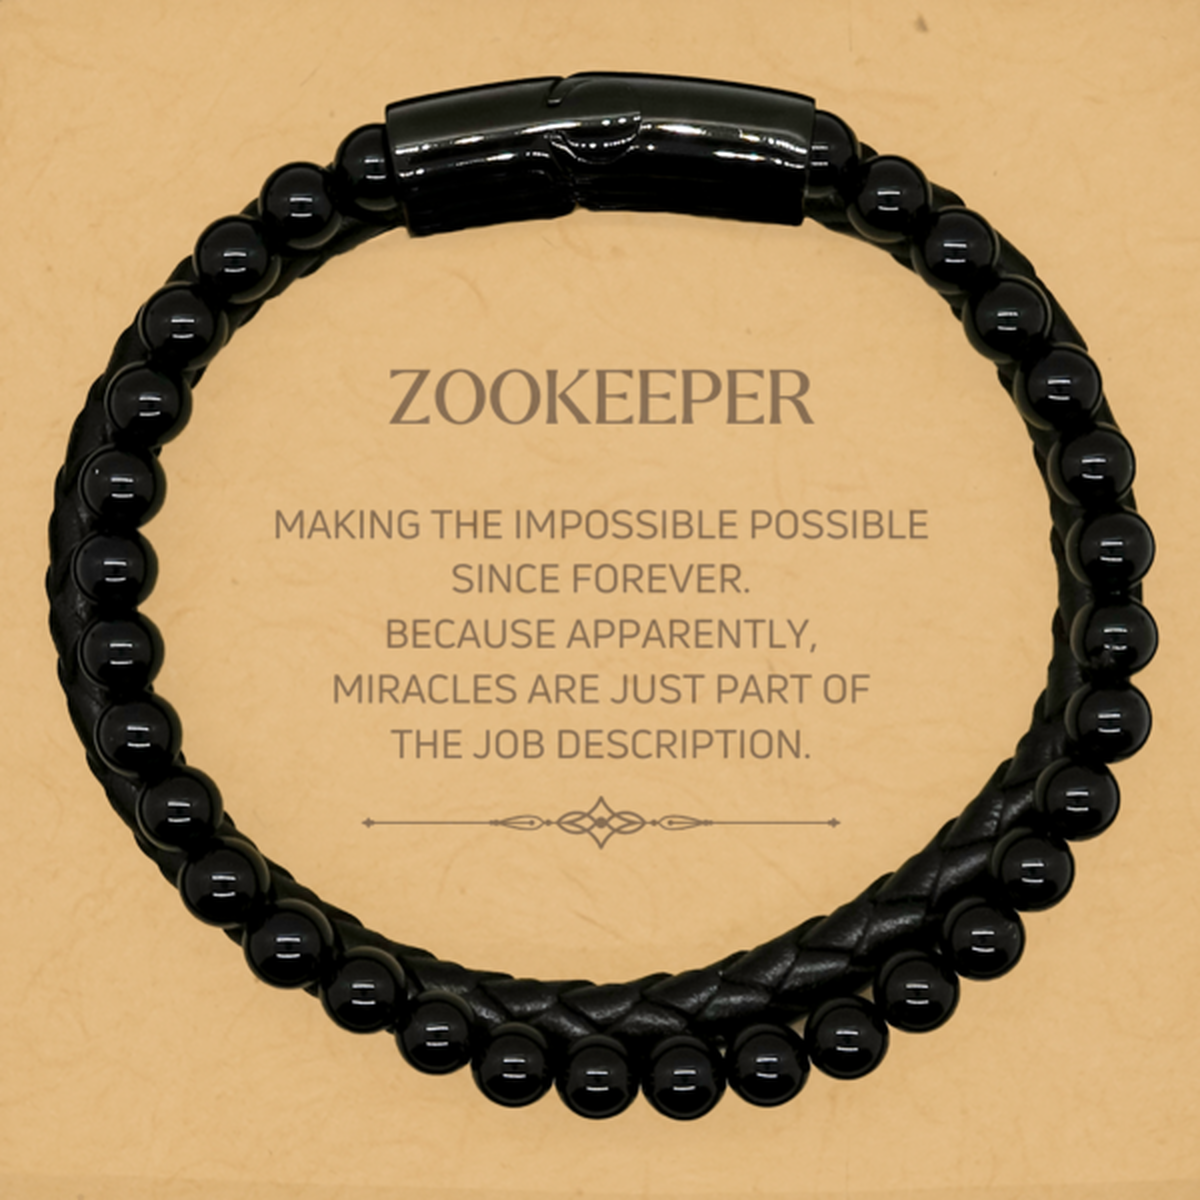 Funny Zookeeper Gifts, Miracles are just part of the job description, Inspirational Birthday Stone Leather Bracelets For Zookeeper, Men, Women, Coworkers, Friends, Boss